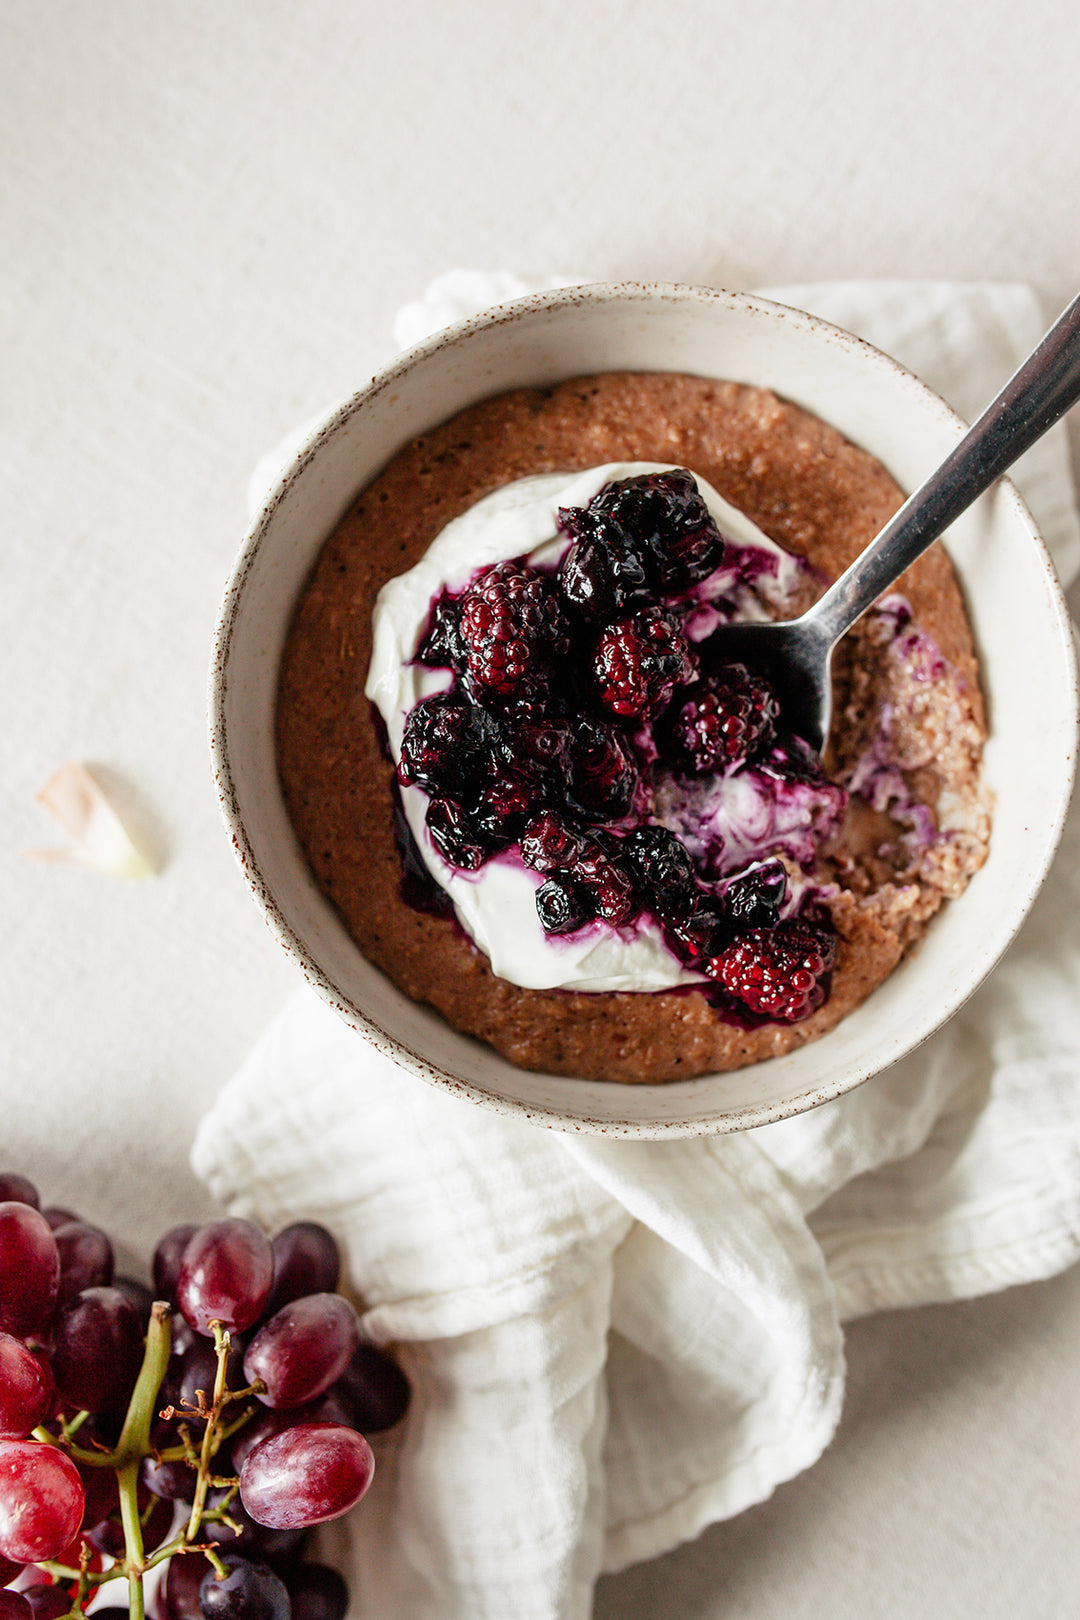 A bowl of warm, gluten-free porridge topped with yogurt, blackberry, and blueberry compote